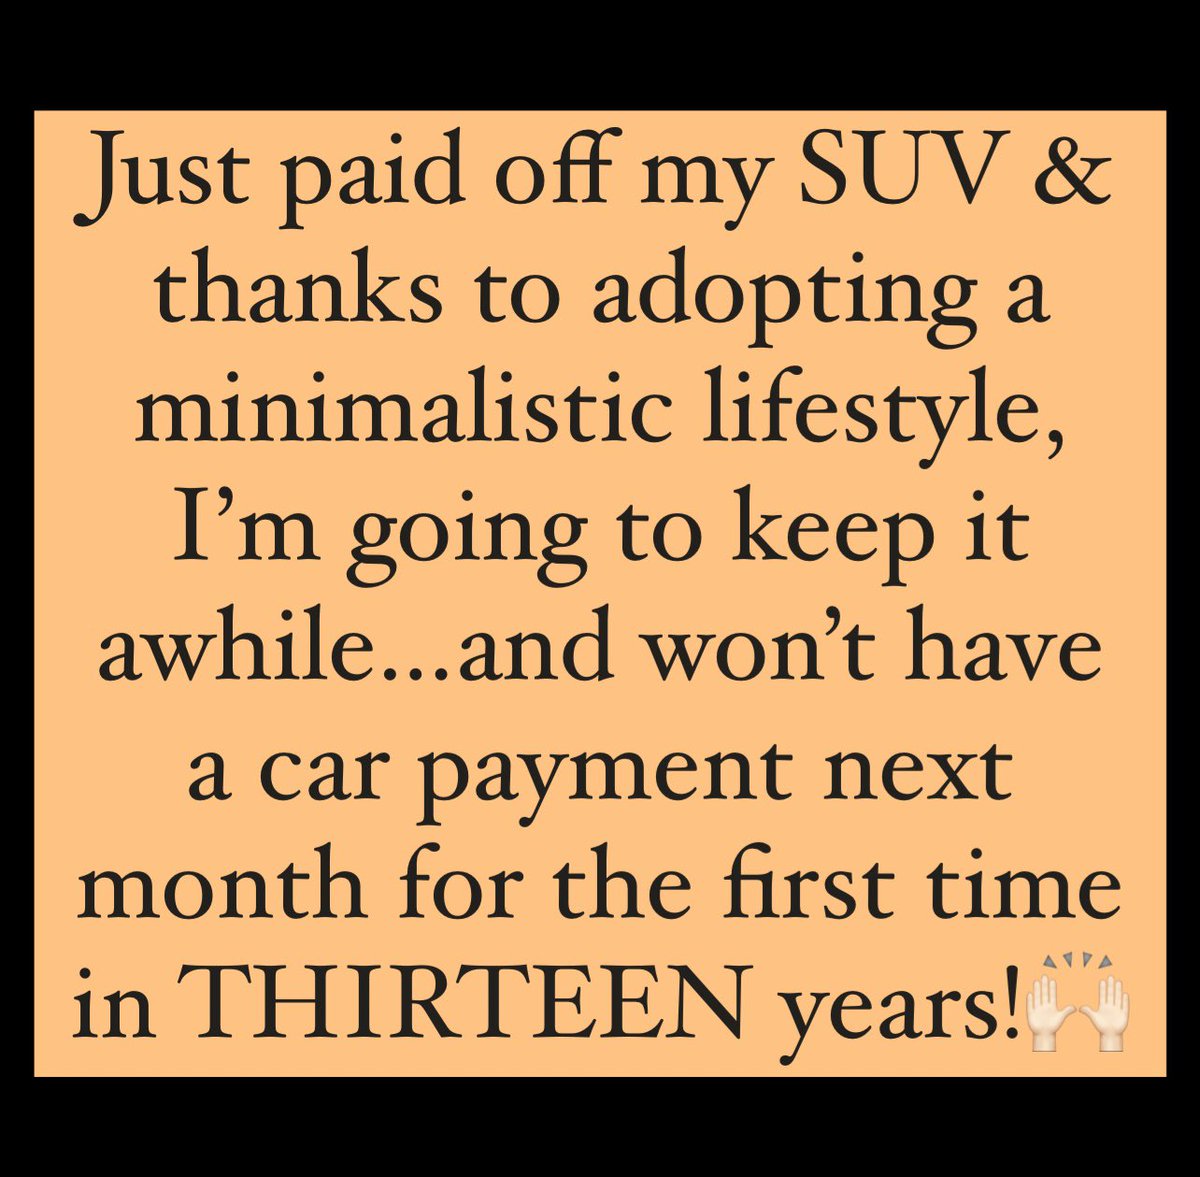 Can’t even believe that I’ve bought & leased FIVE BRAND NEW vehicles in the past 13 years!🤯 Thank goodness for discovering minimalism (or I’d already be at the dealership upgrading)!👊🏻 #minimalism #minimalisticlifestyle #lessismore